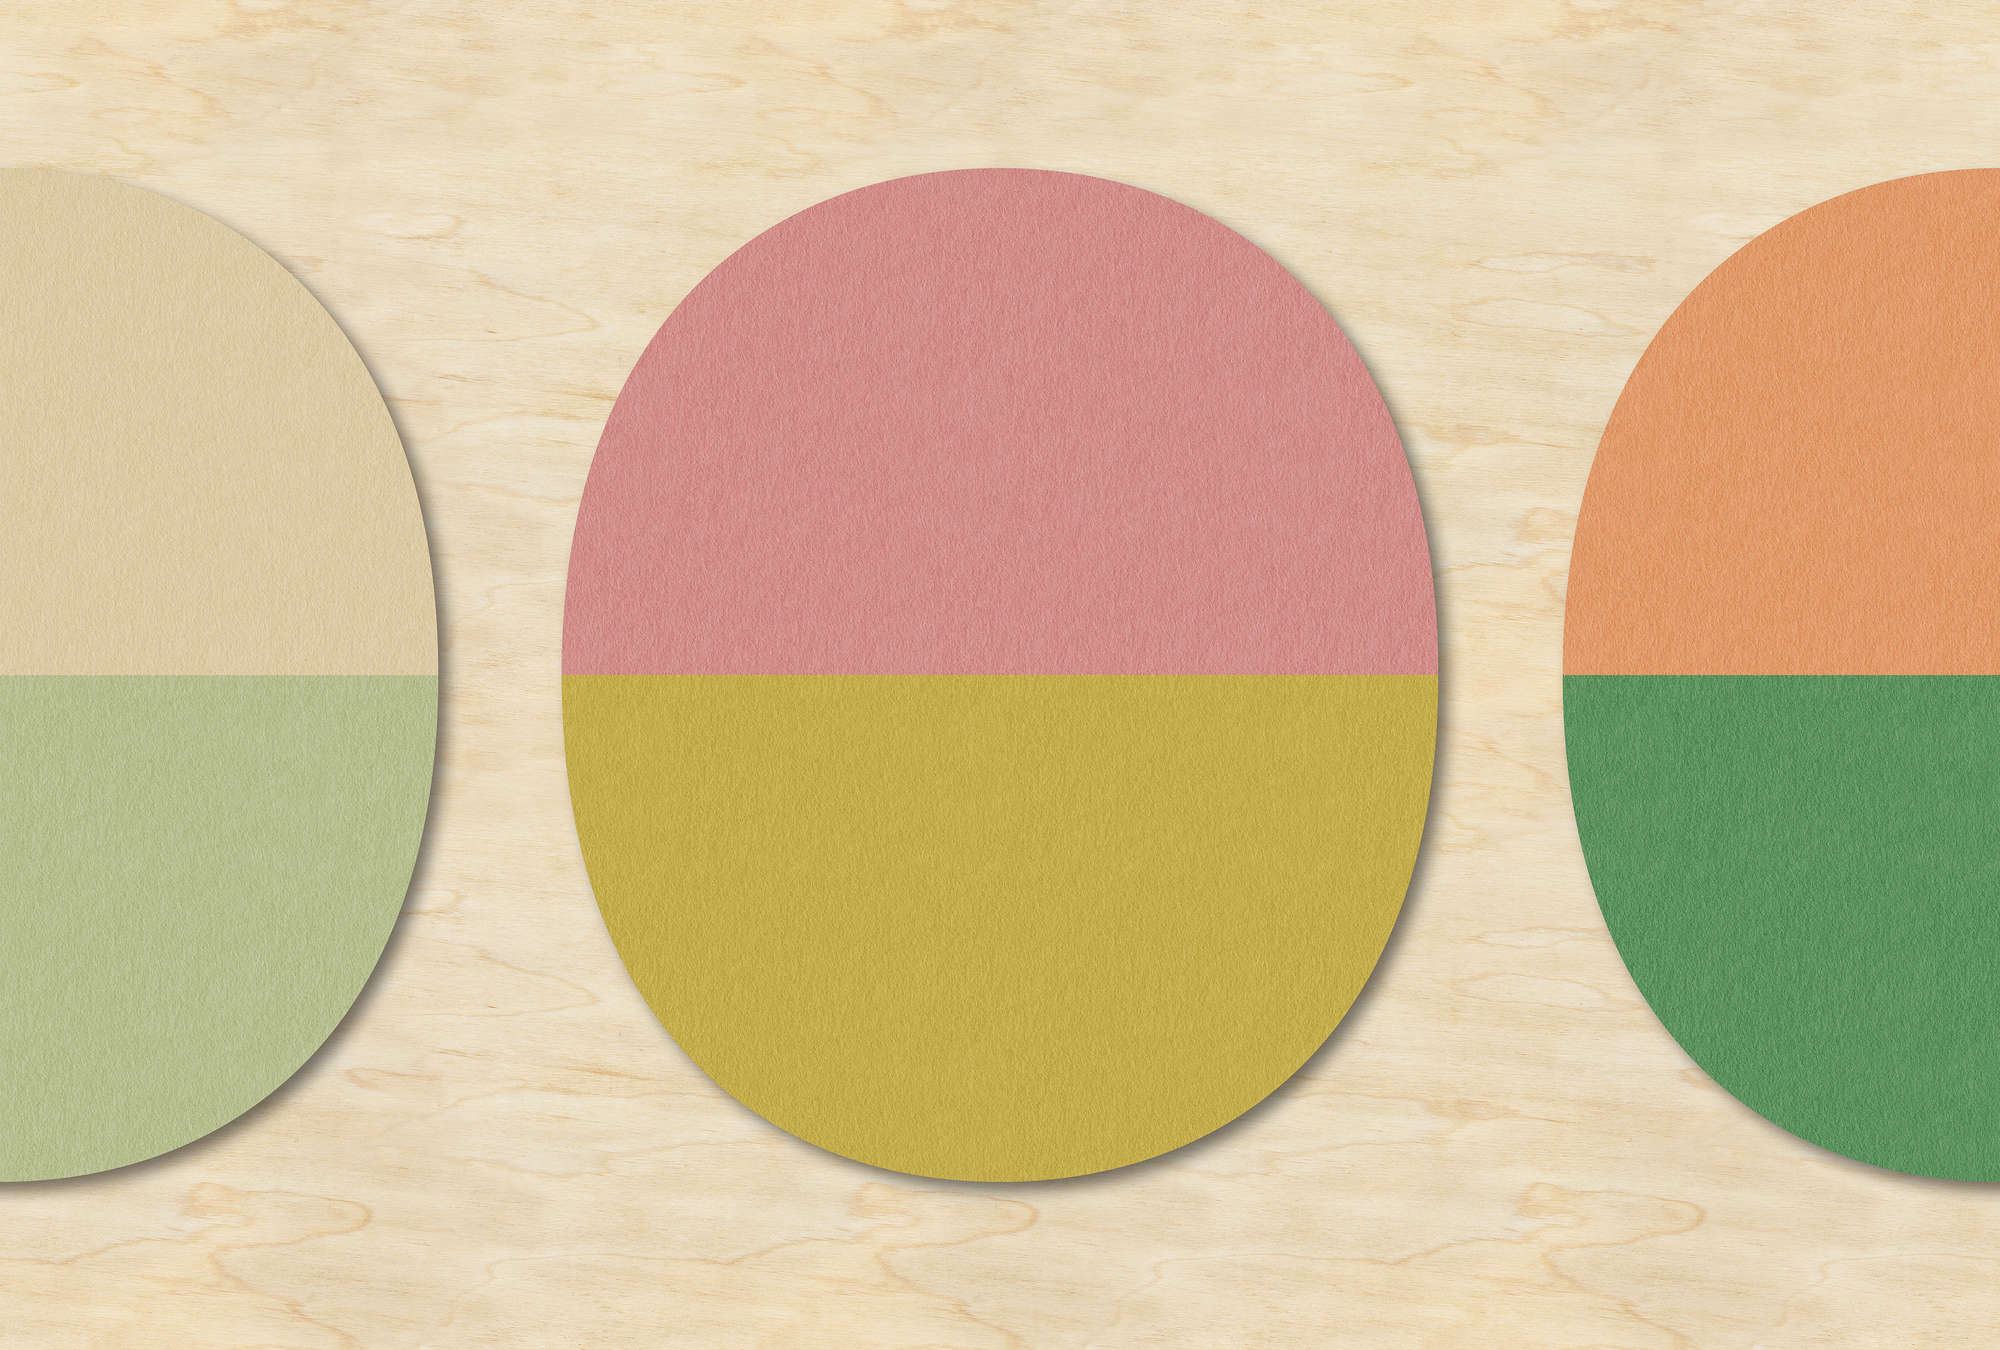             Split ovals 2 - Retro wallpaper in plywood,felt structure with colourful ovals - Beige, Green | Pearl smooth non-woven
        